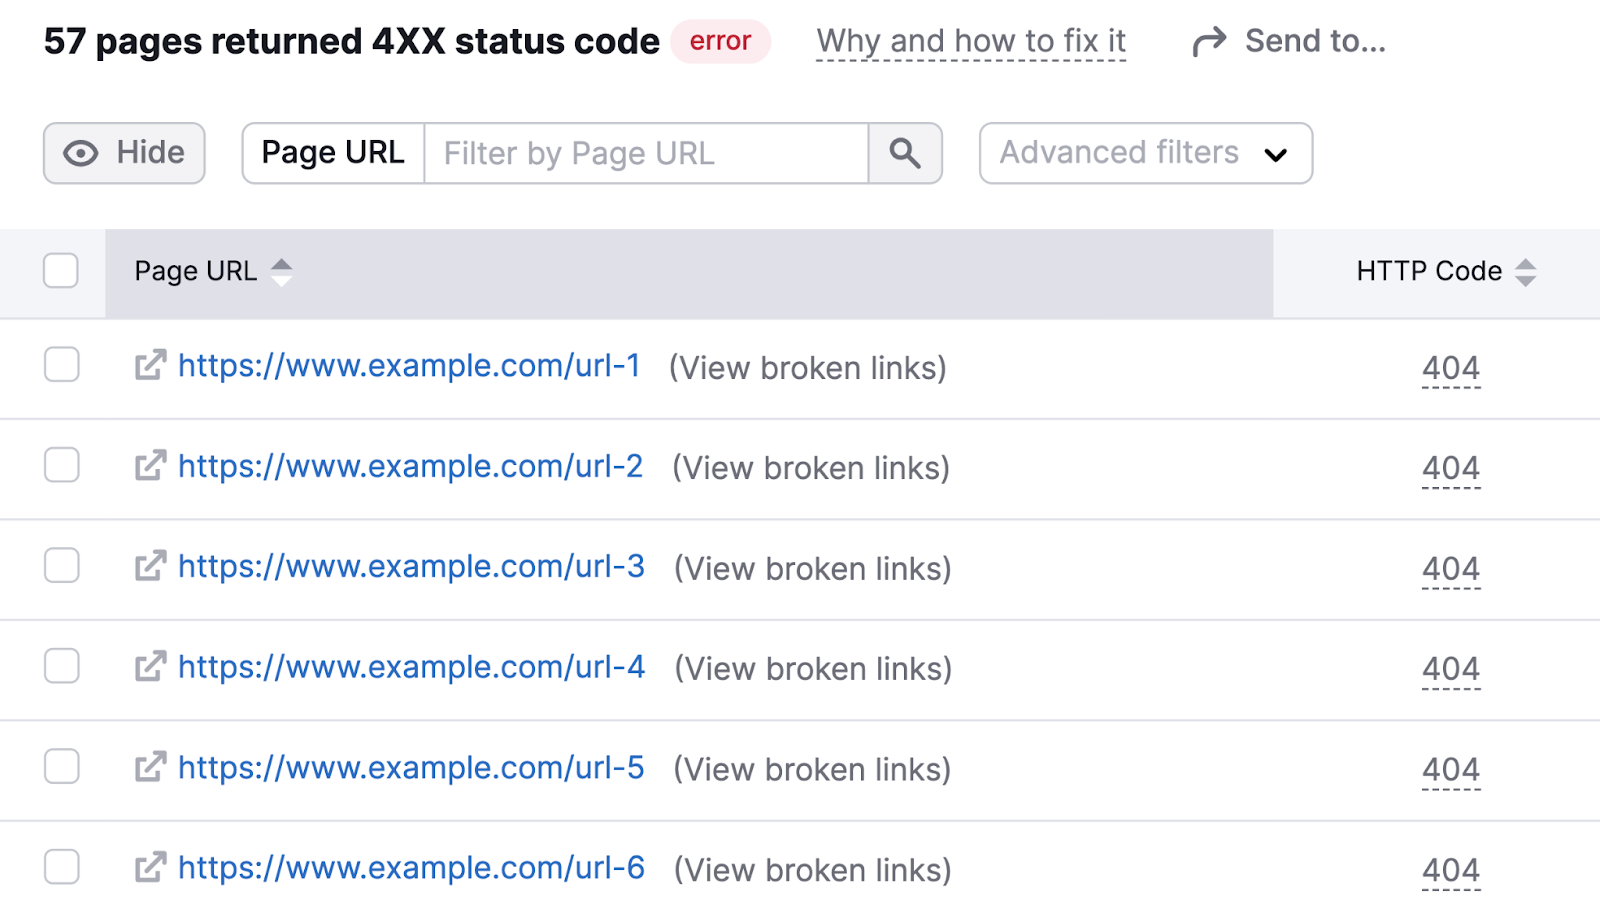 A list of page URLs that have returned a 4XX status code errors